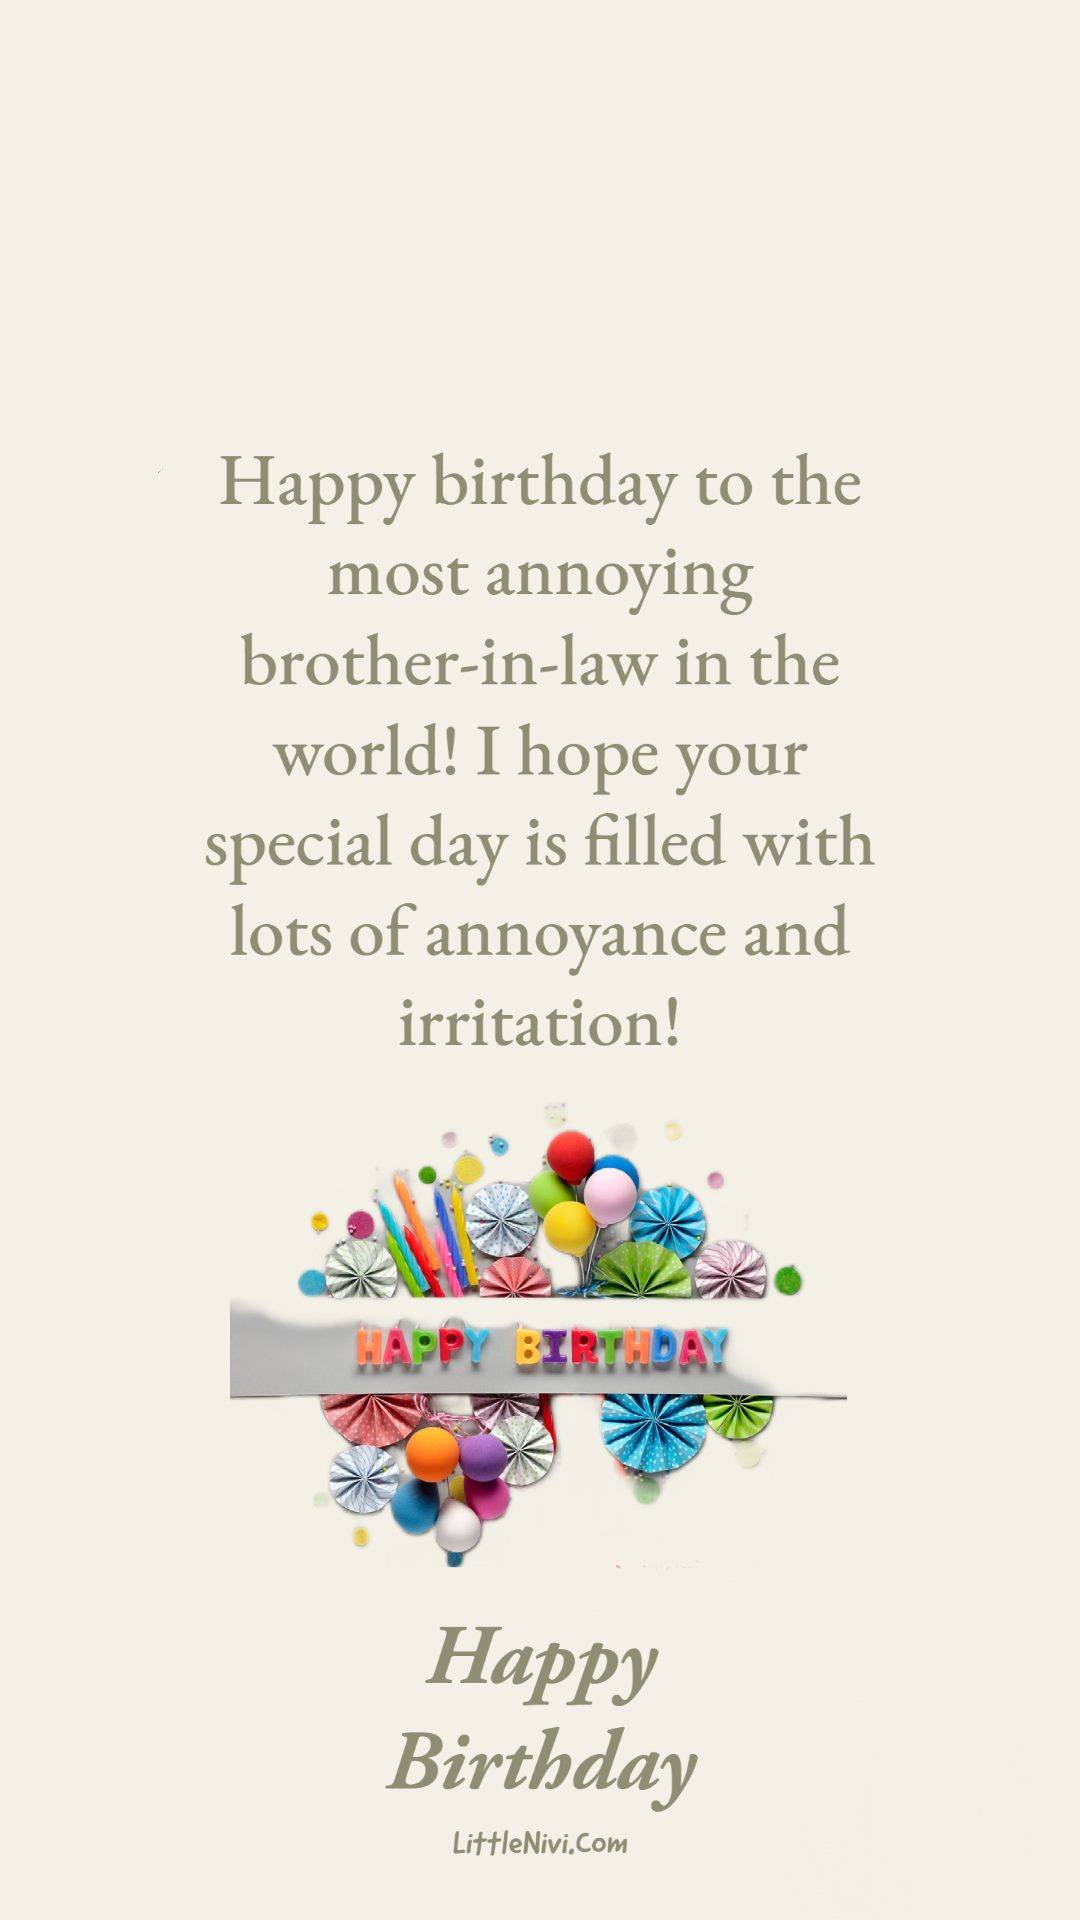 top birthday wishes and messages for brother in law